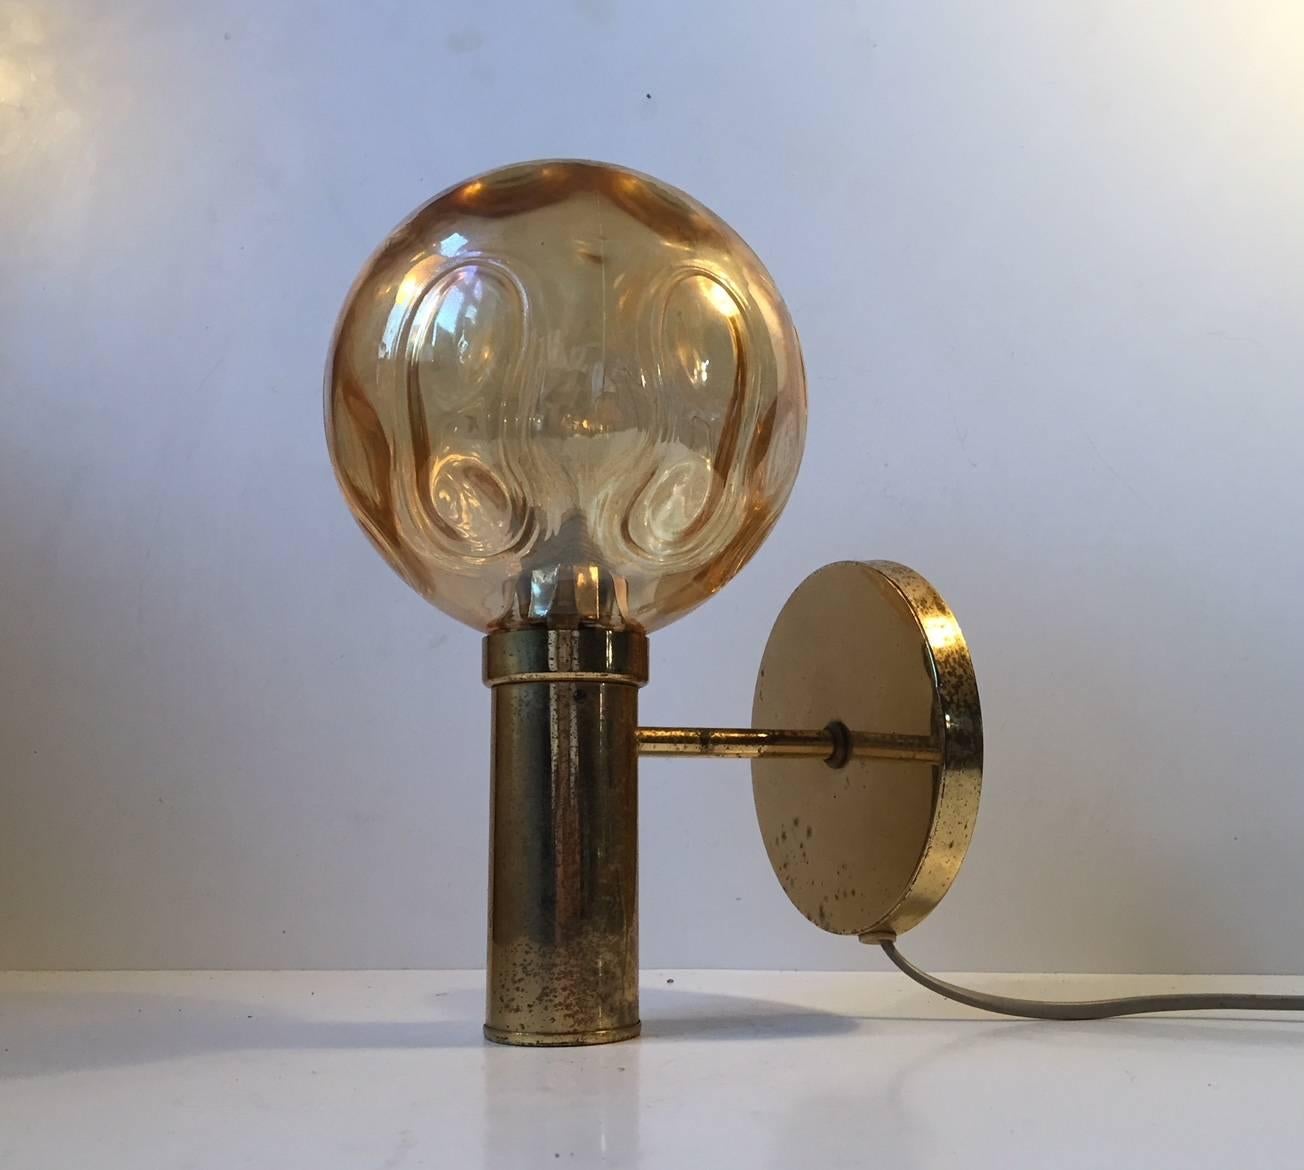 Lounge sconce with spherical amber colored optical glass shade manufactured and designed by Vitrika in a style reminiscent of Hans-Agne Jakobsson. Nice vintage and working order with a rich patina to the brass frame. Fitted with E27 lightbulb up to